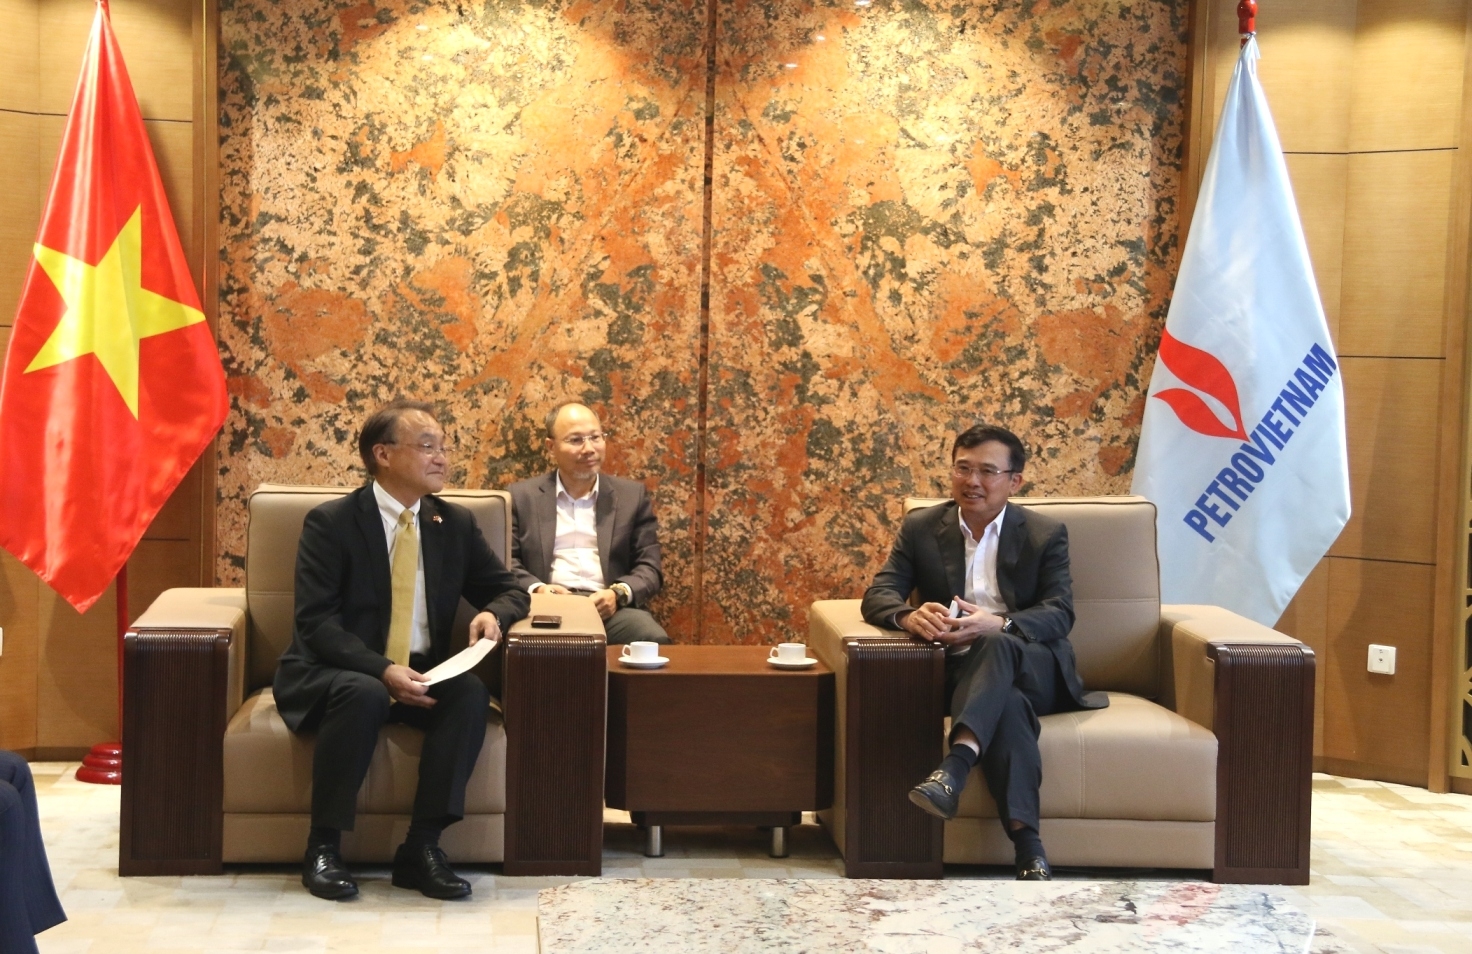 Petrovietnam Chairman of the Board of Directors Hoang Quoc Vuong receives JX NOEX leaders